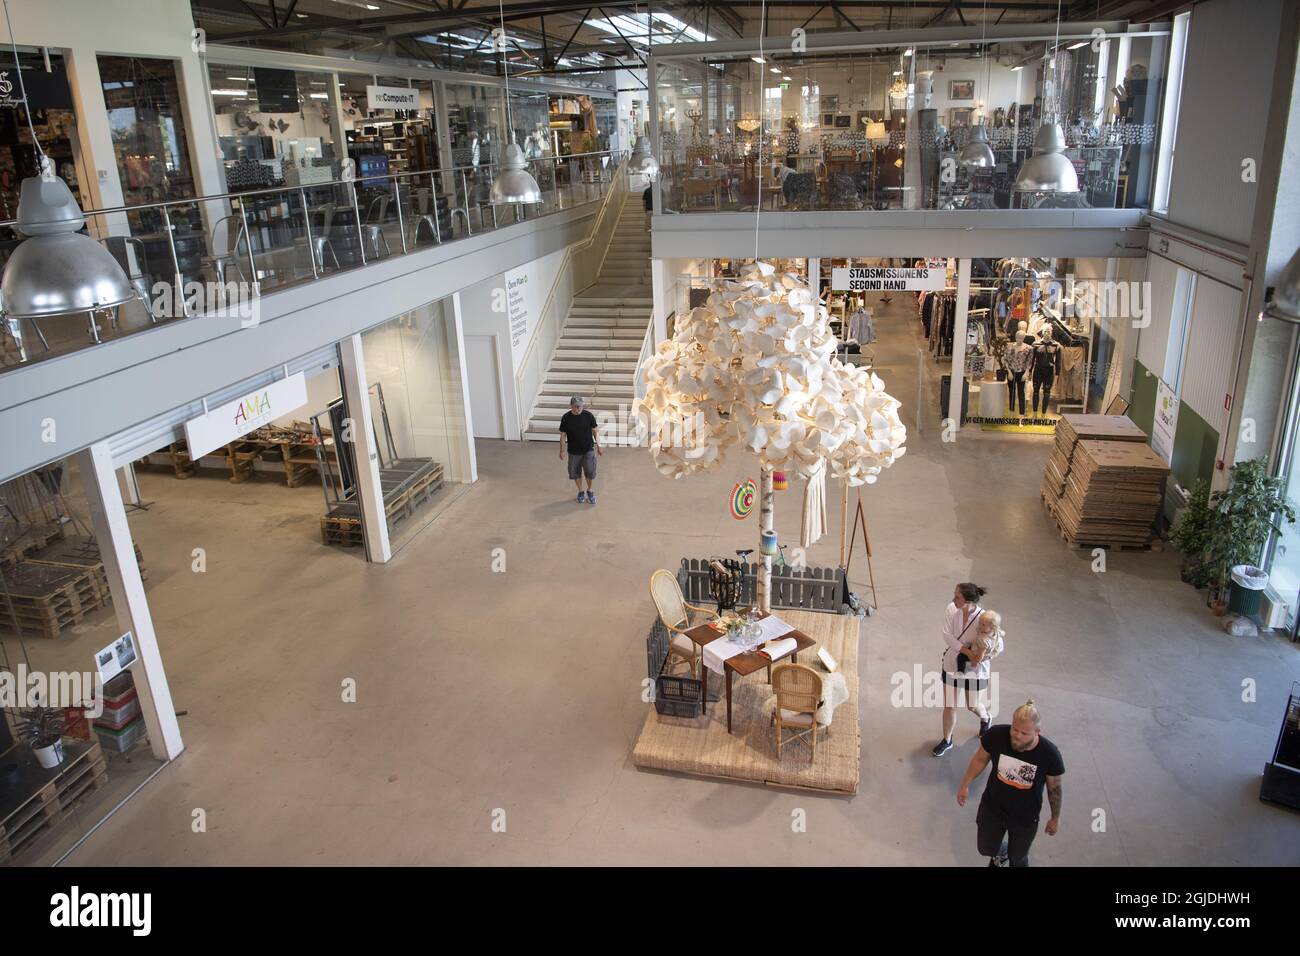 ReTuna Aterbruksgalleria the world's first recycling shopping center in  Eskilstuna, Sweden, August 11, 2020. The visitors drop off reusable items  and electronic devices in the shopping center's depot. The items are then